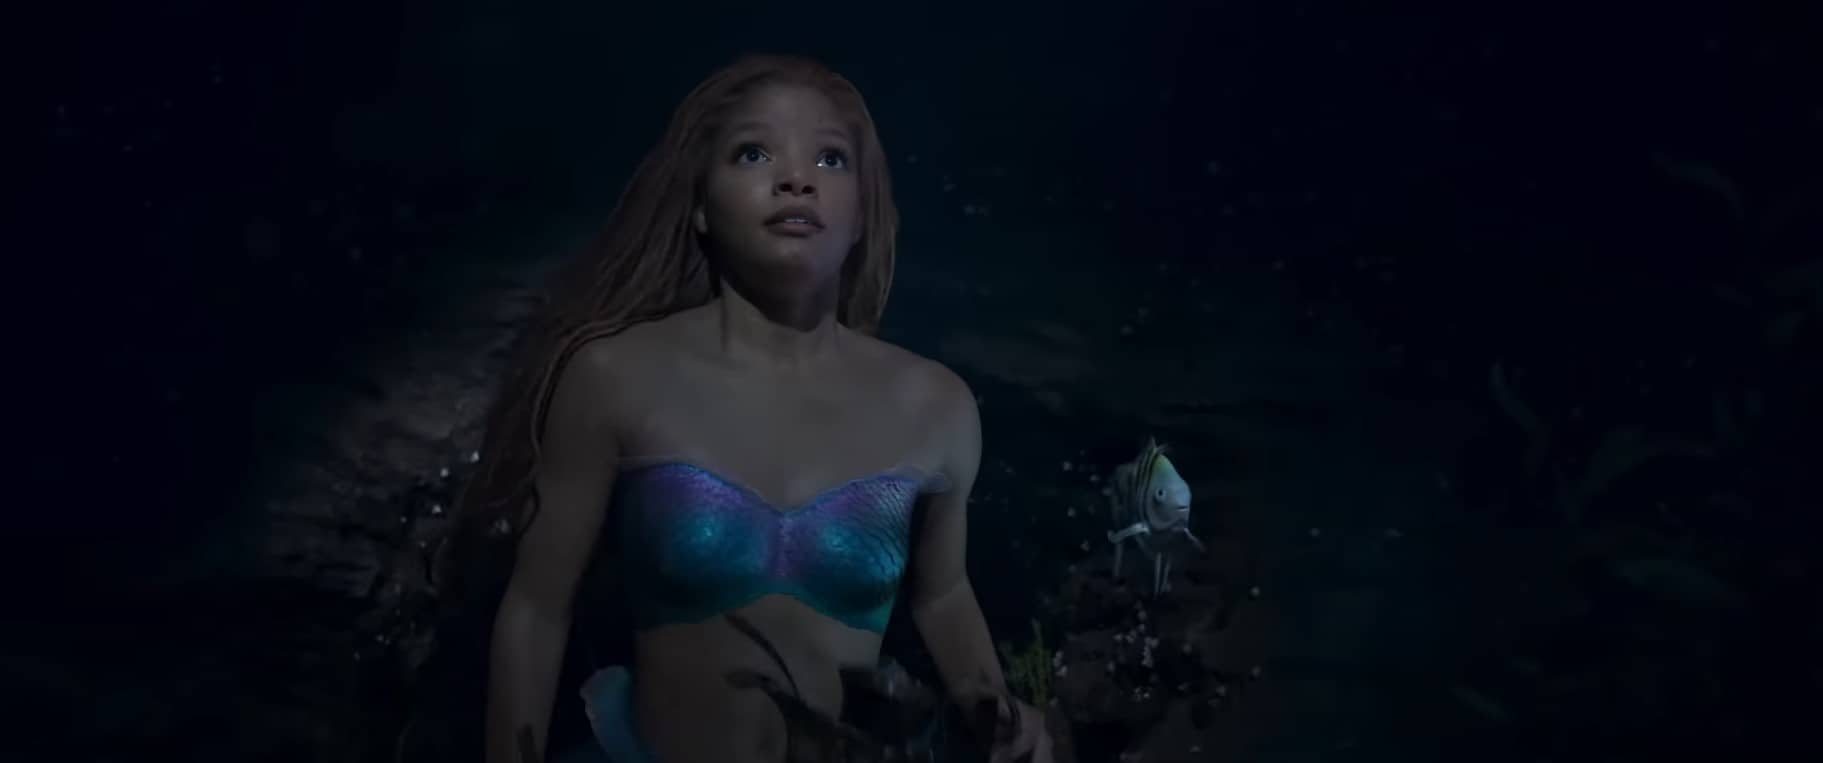 The Little Mermaid Controversy